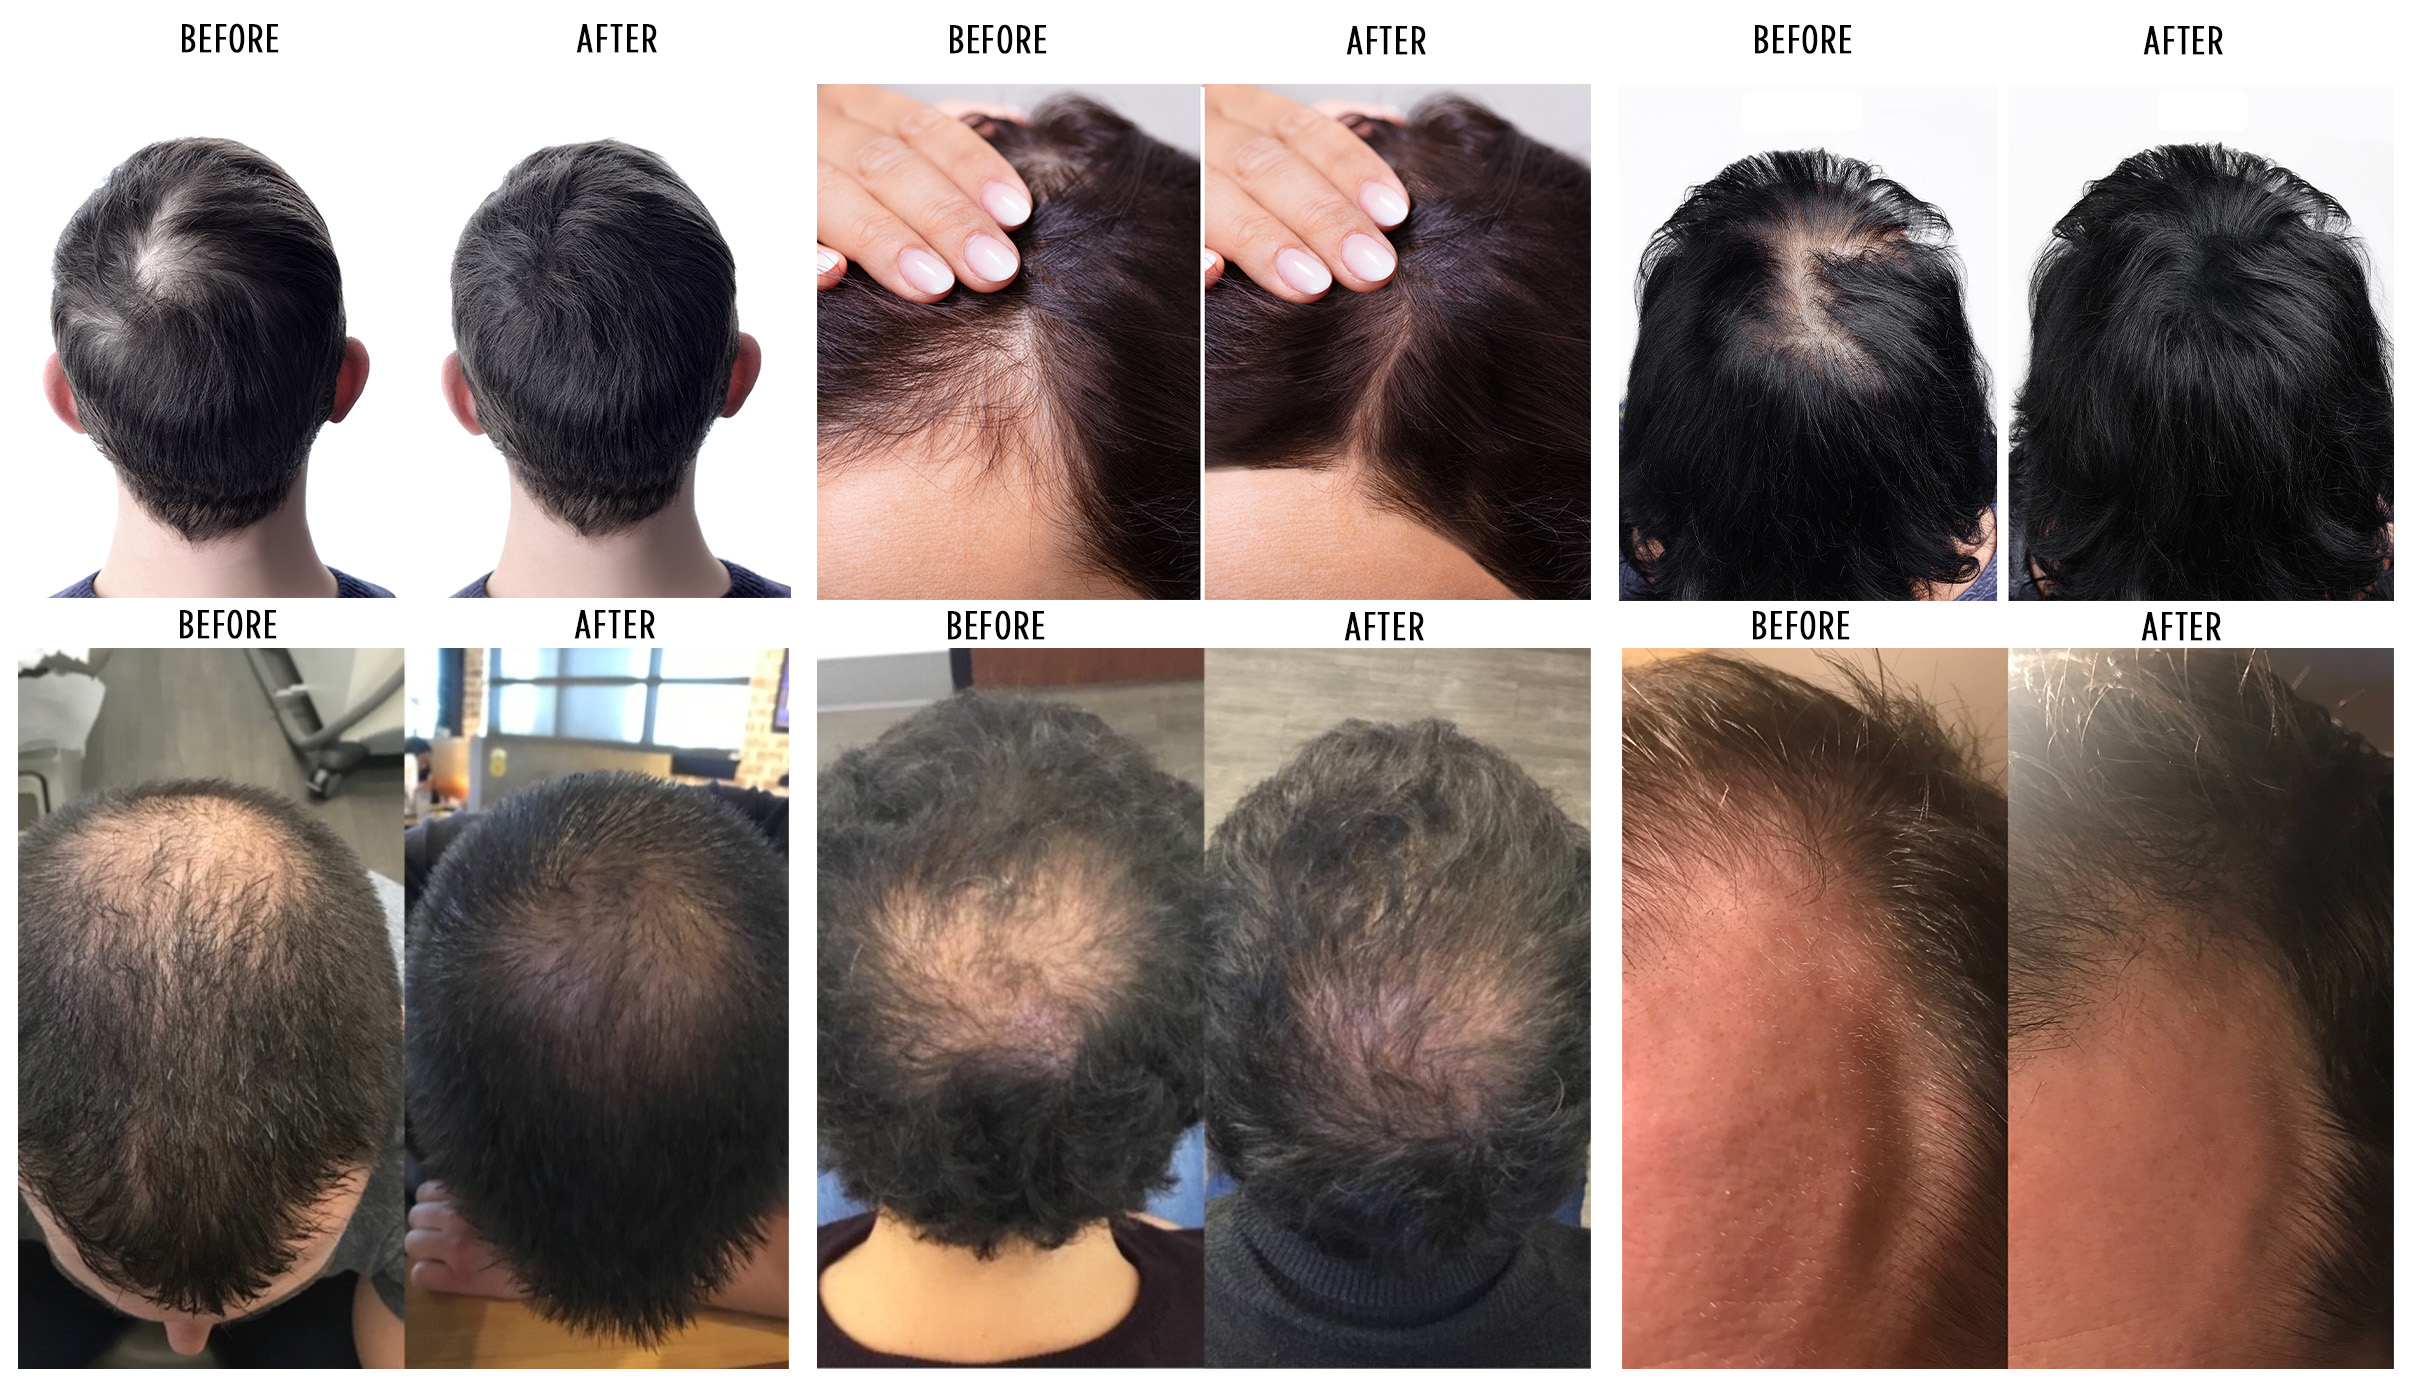 Platelet-Rich Plasma (PRP) Therapy for Hair Loss | Advanced Dermatology